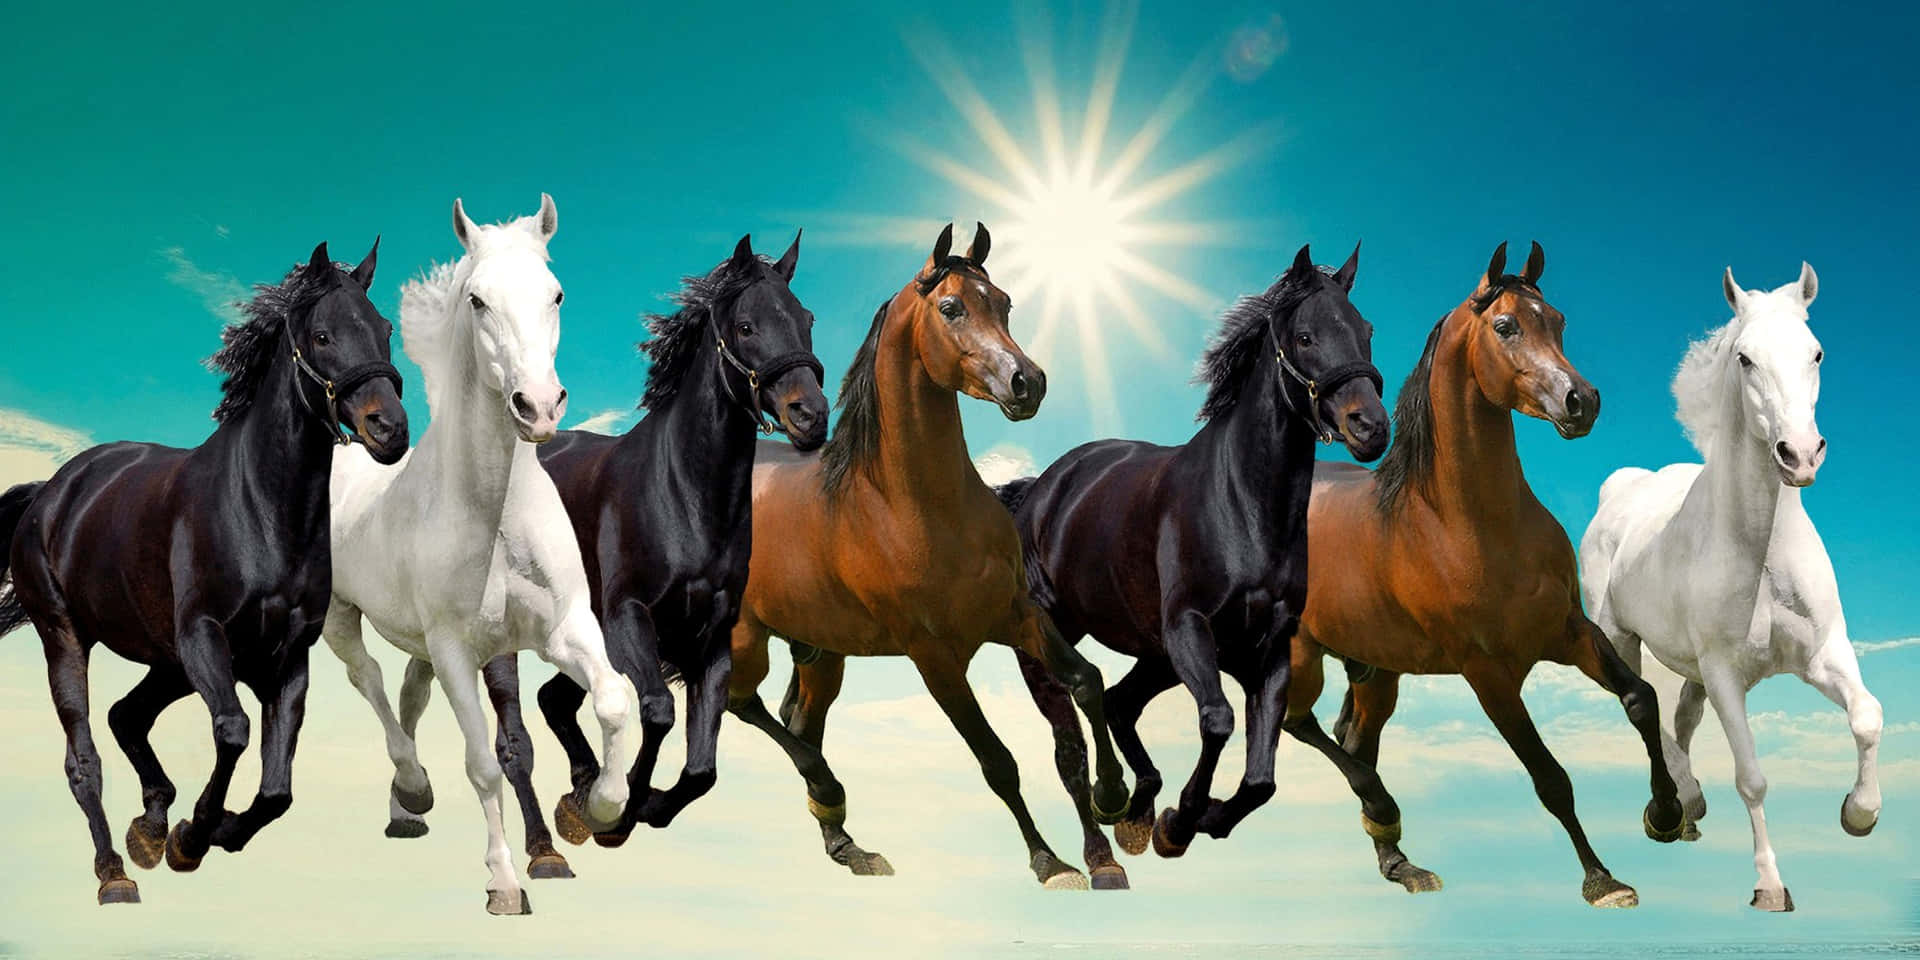 Download 7 Horses In Brown, White, And Black Wallpaper 